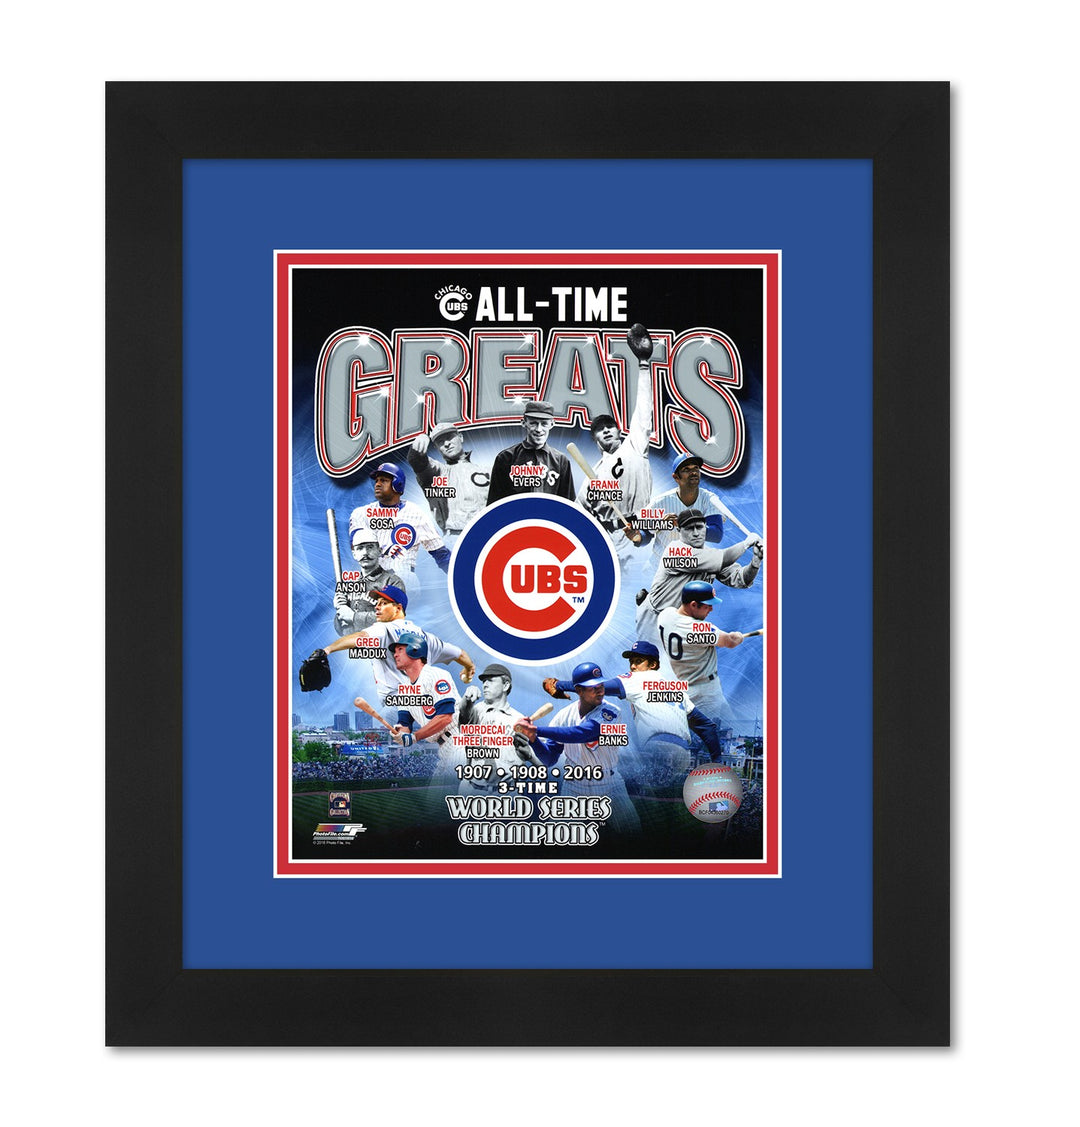 Chicago Cubs All-Time Greats Team Collage 13x16 Professionally Framed and Matted with Matching Team Colors